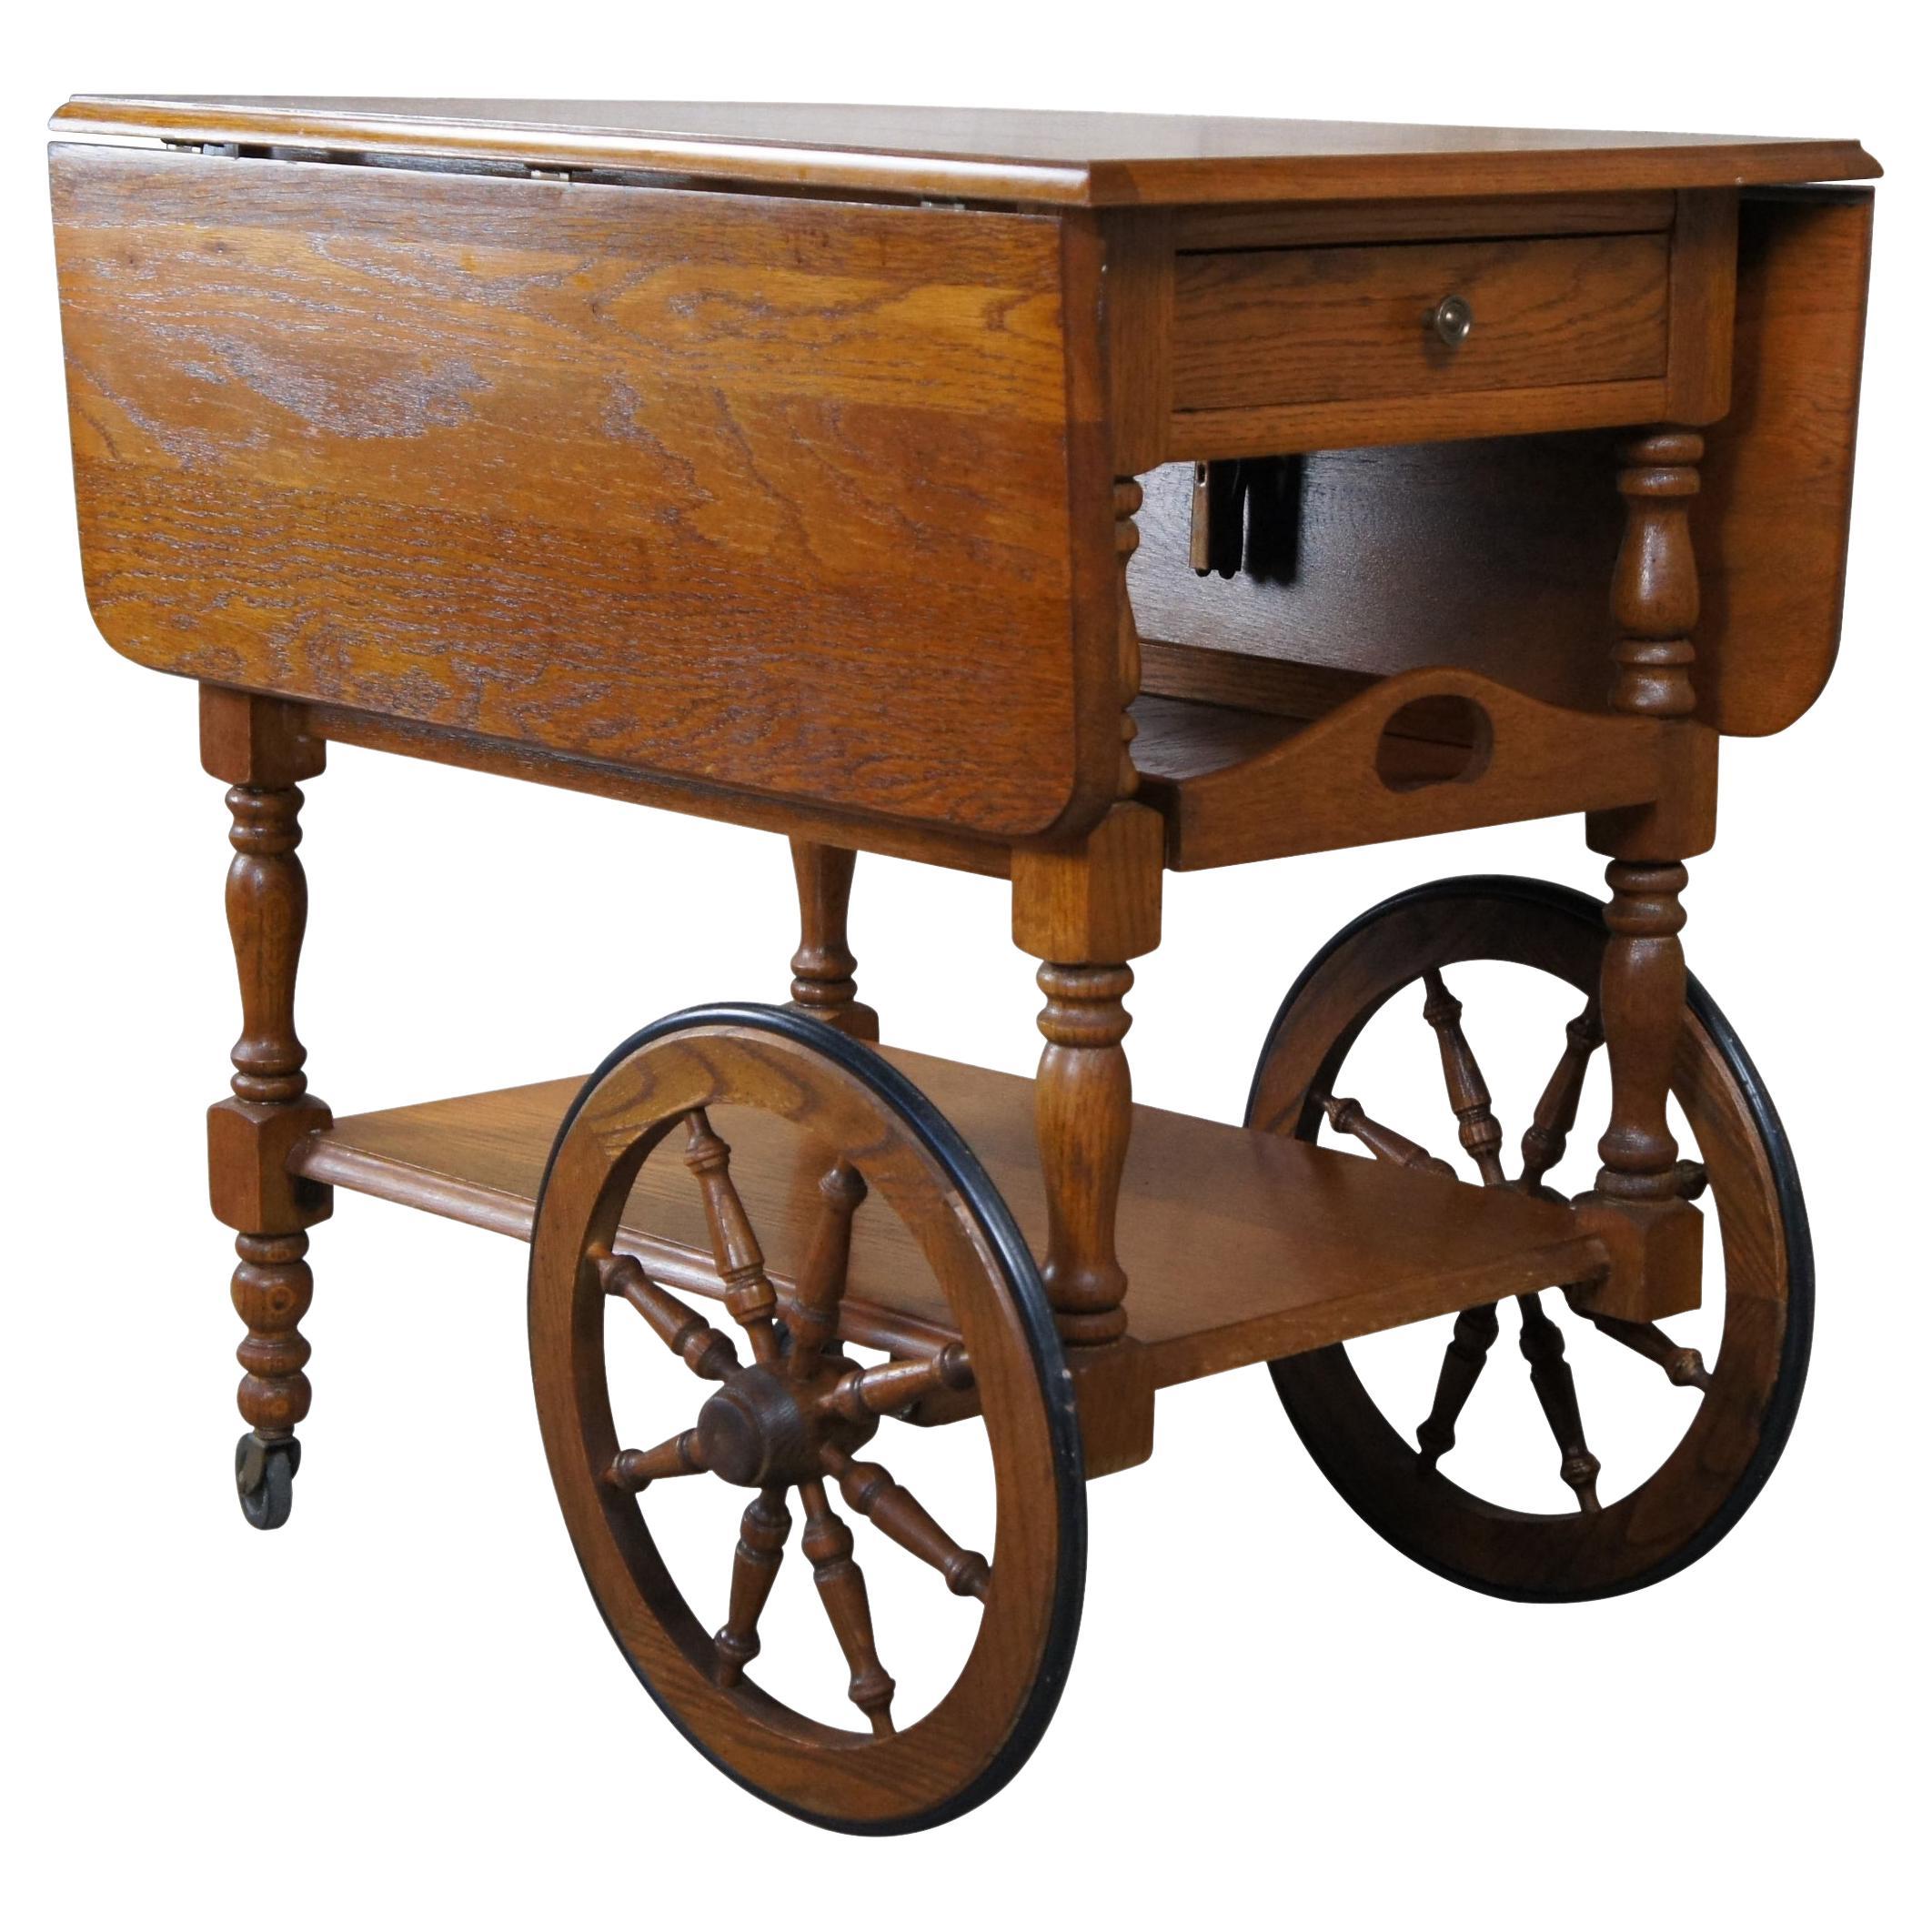 Mid 20th Century bar or tea cart. Made from oak with French Brittany styling. Includes drop leafs, dovetailed drawer and pull out drink serving tray. Features wagon wheel design and neatly concealed handle. 

Measures: 30